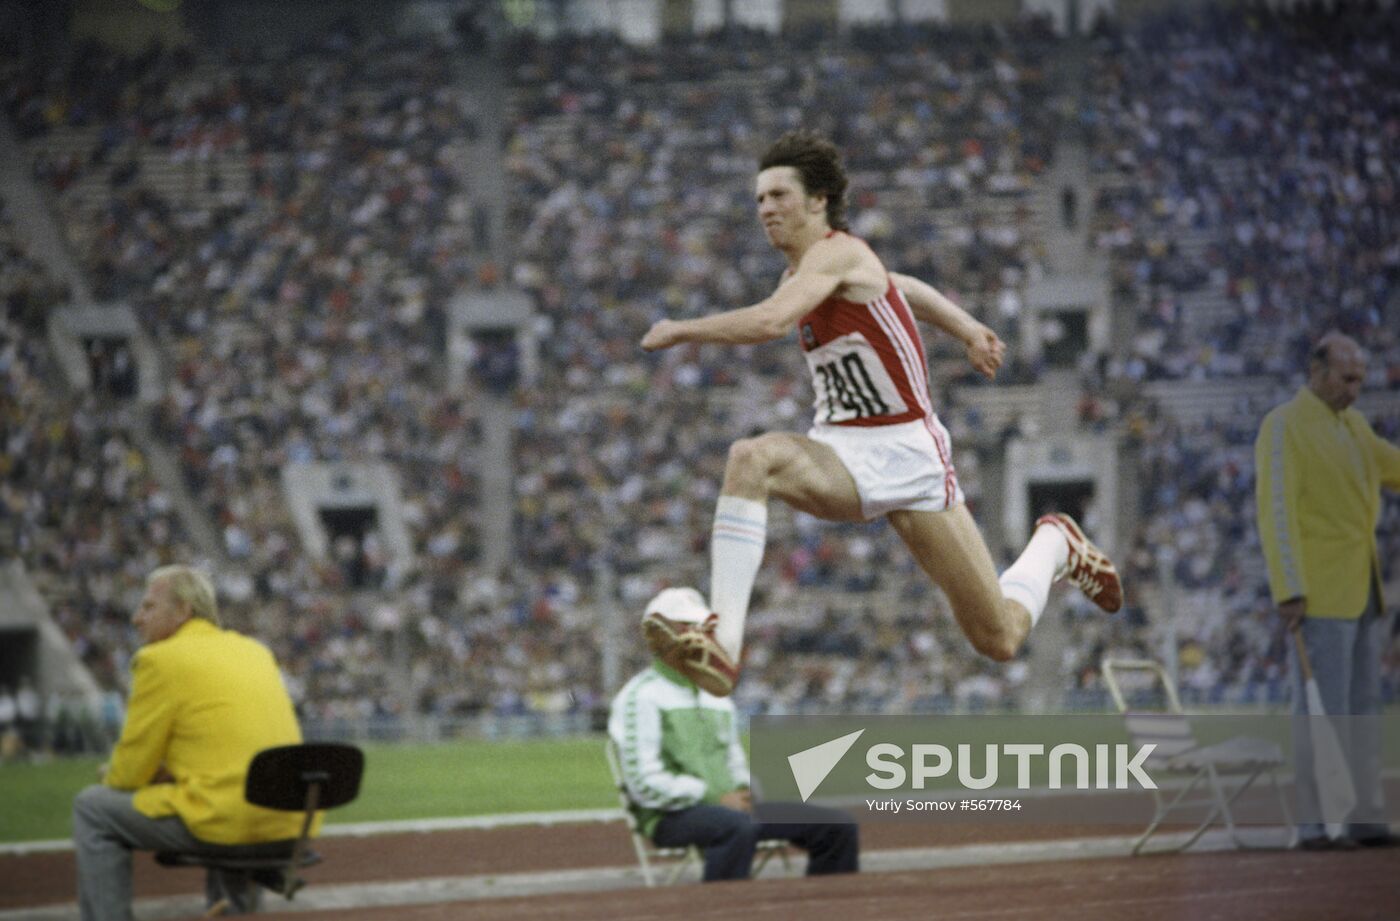 1980 Olympic Games. Triple jump